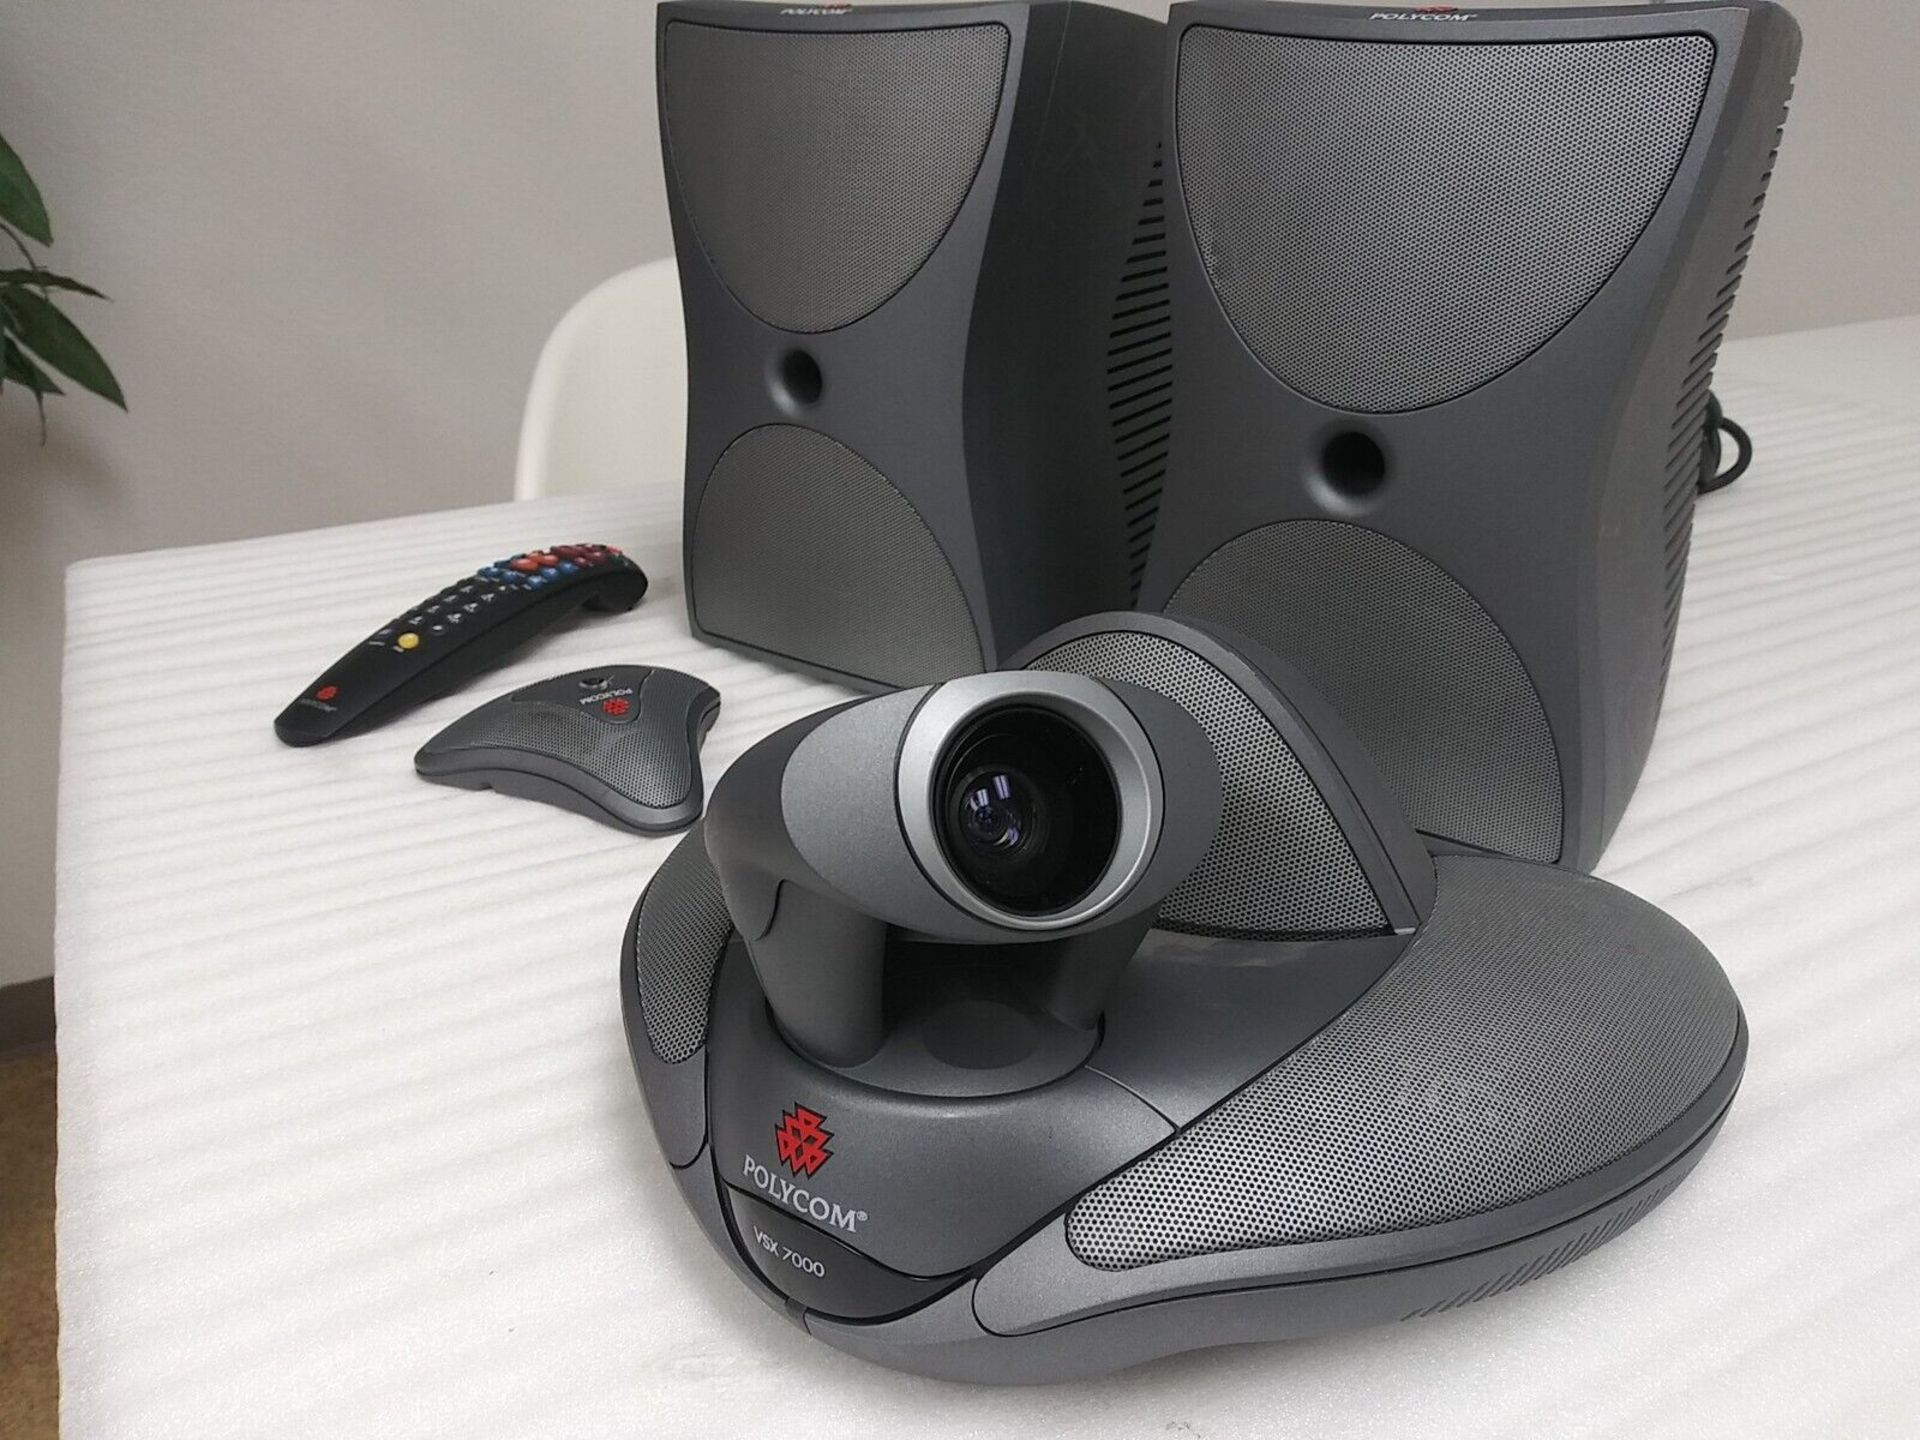 Polycom VSX 7000 Video Conferencing System Camera Microphone w/ 2 Subwoofers - Image 2 of 7